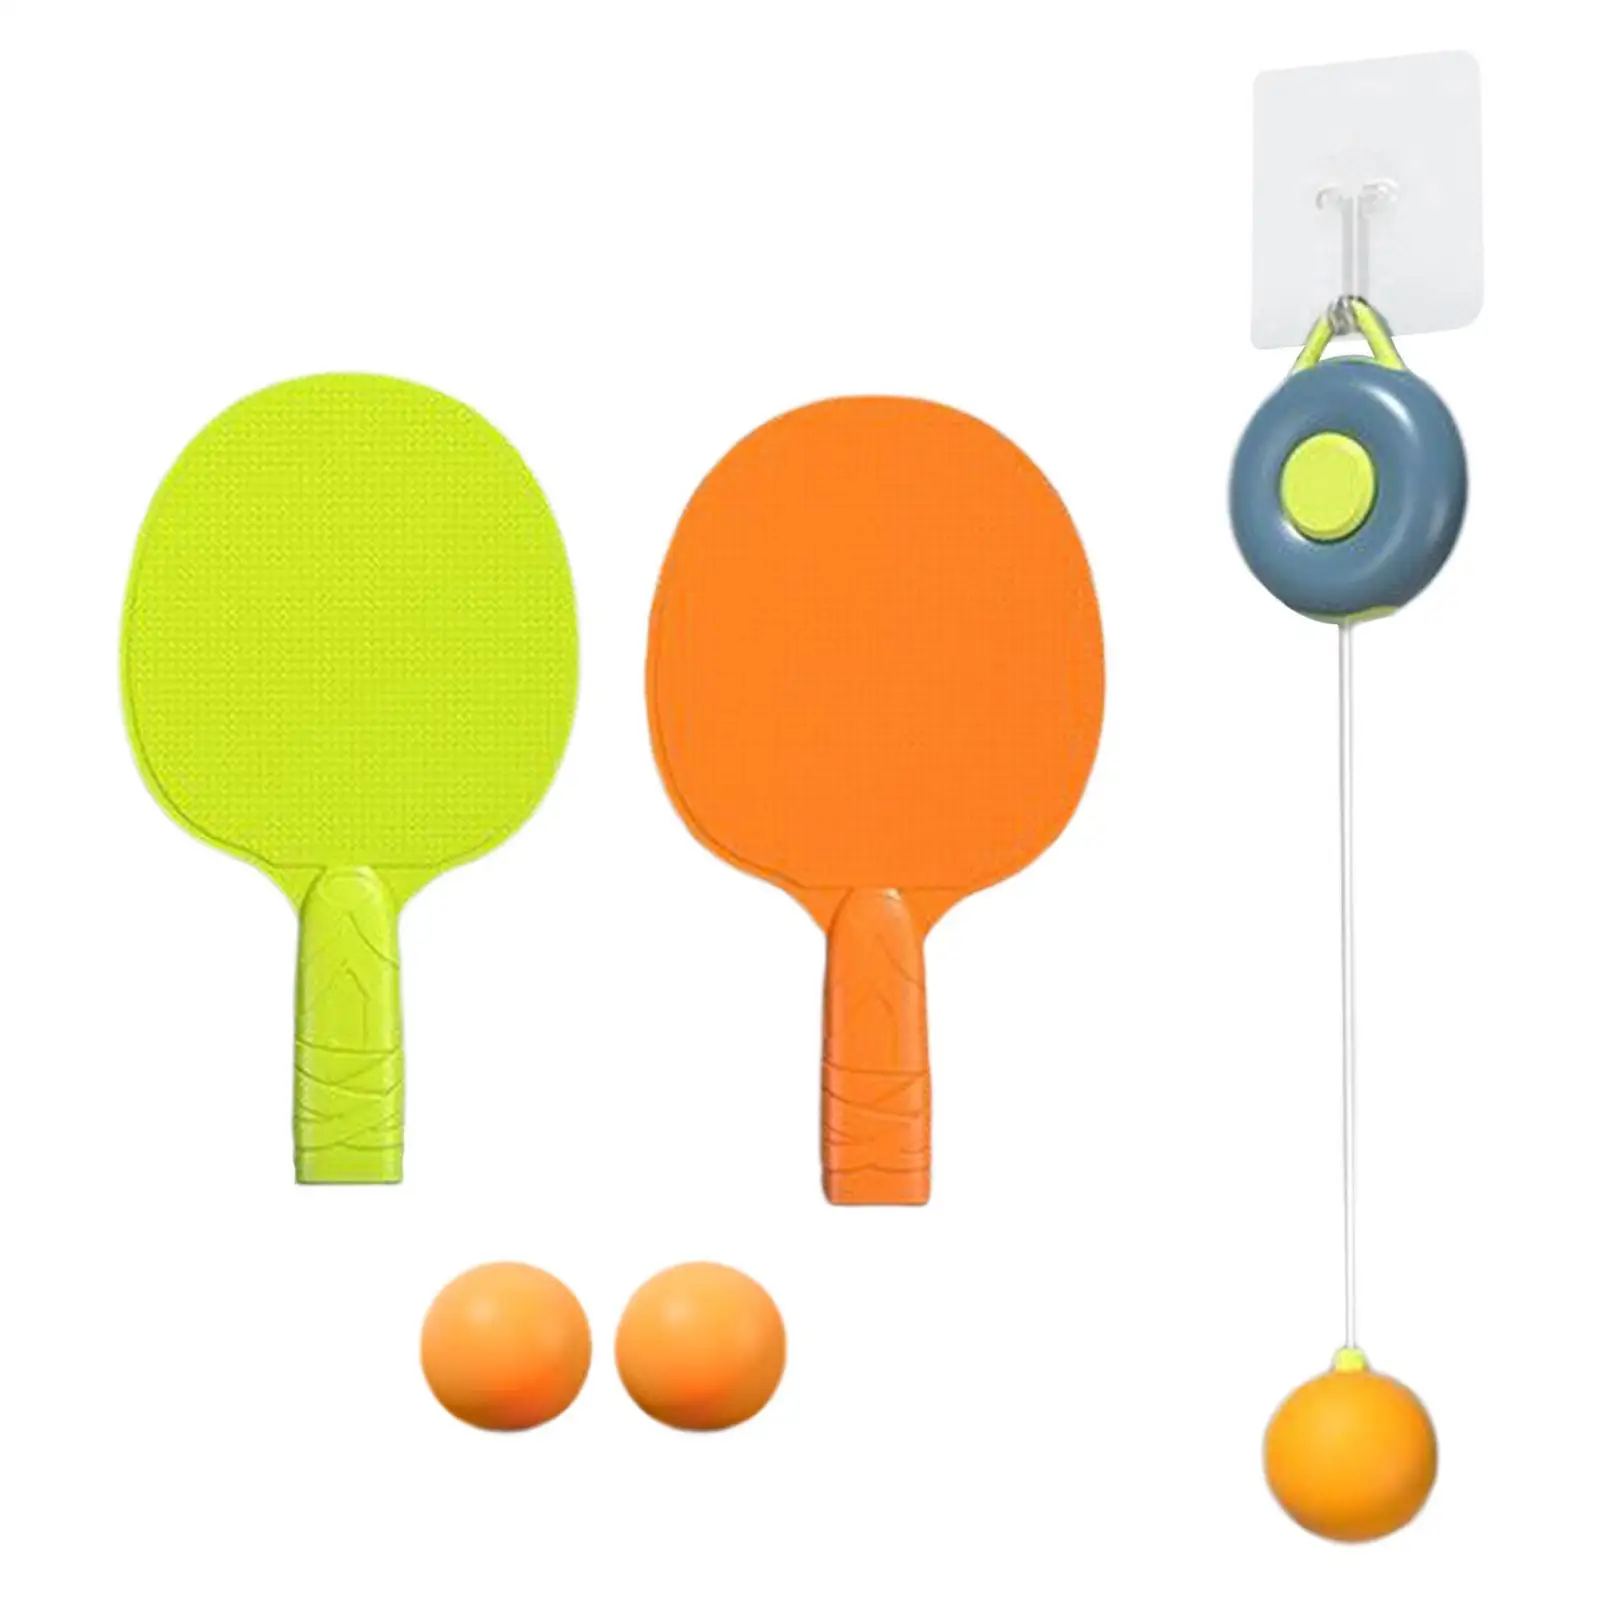 

Tennis Trainer Self Training Set Sparring Device Pingpong Balls Paddles Set for Boys Girls Beginners Parent Kids Interaction